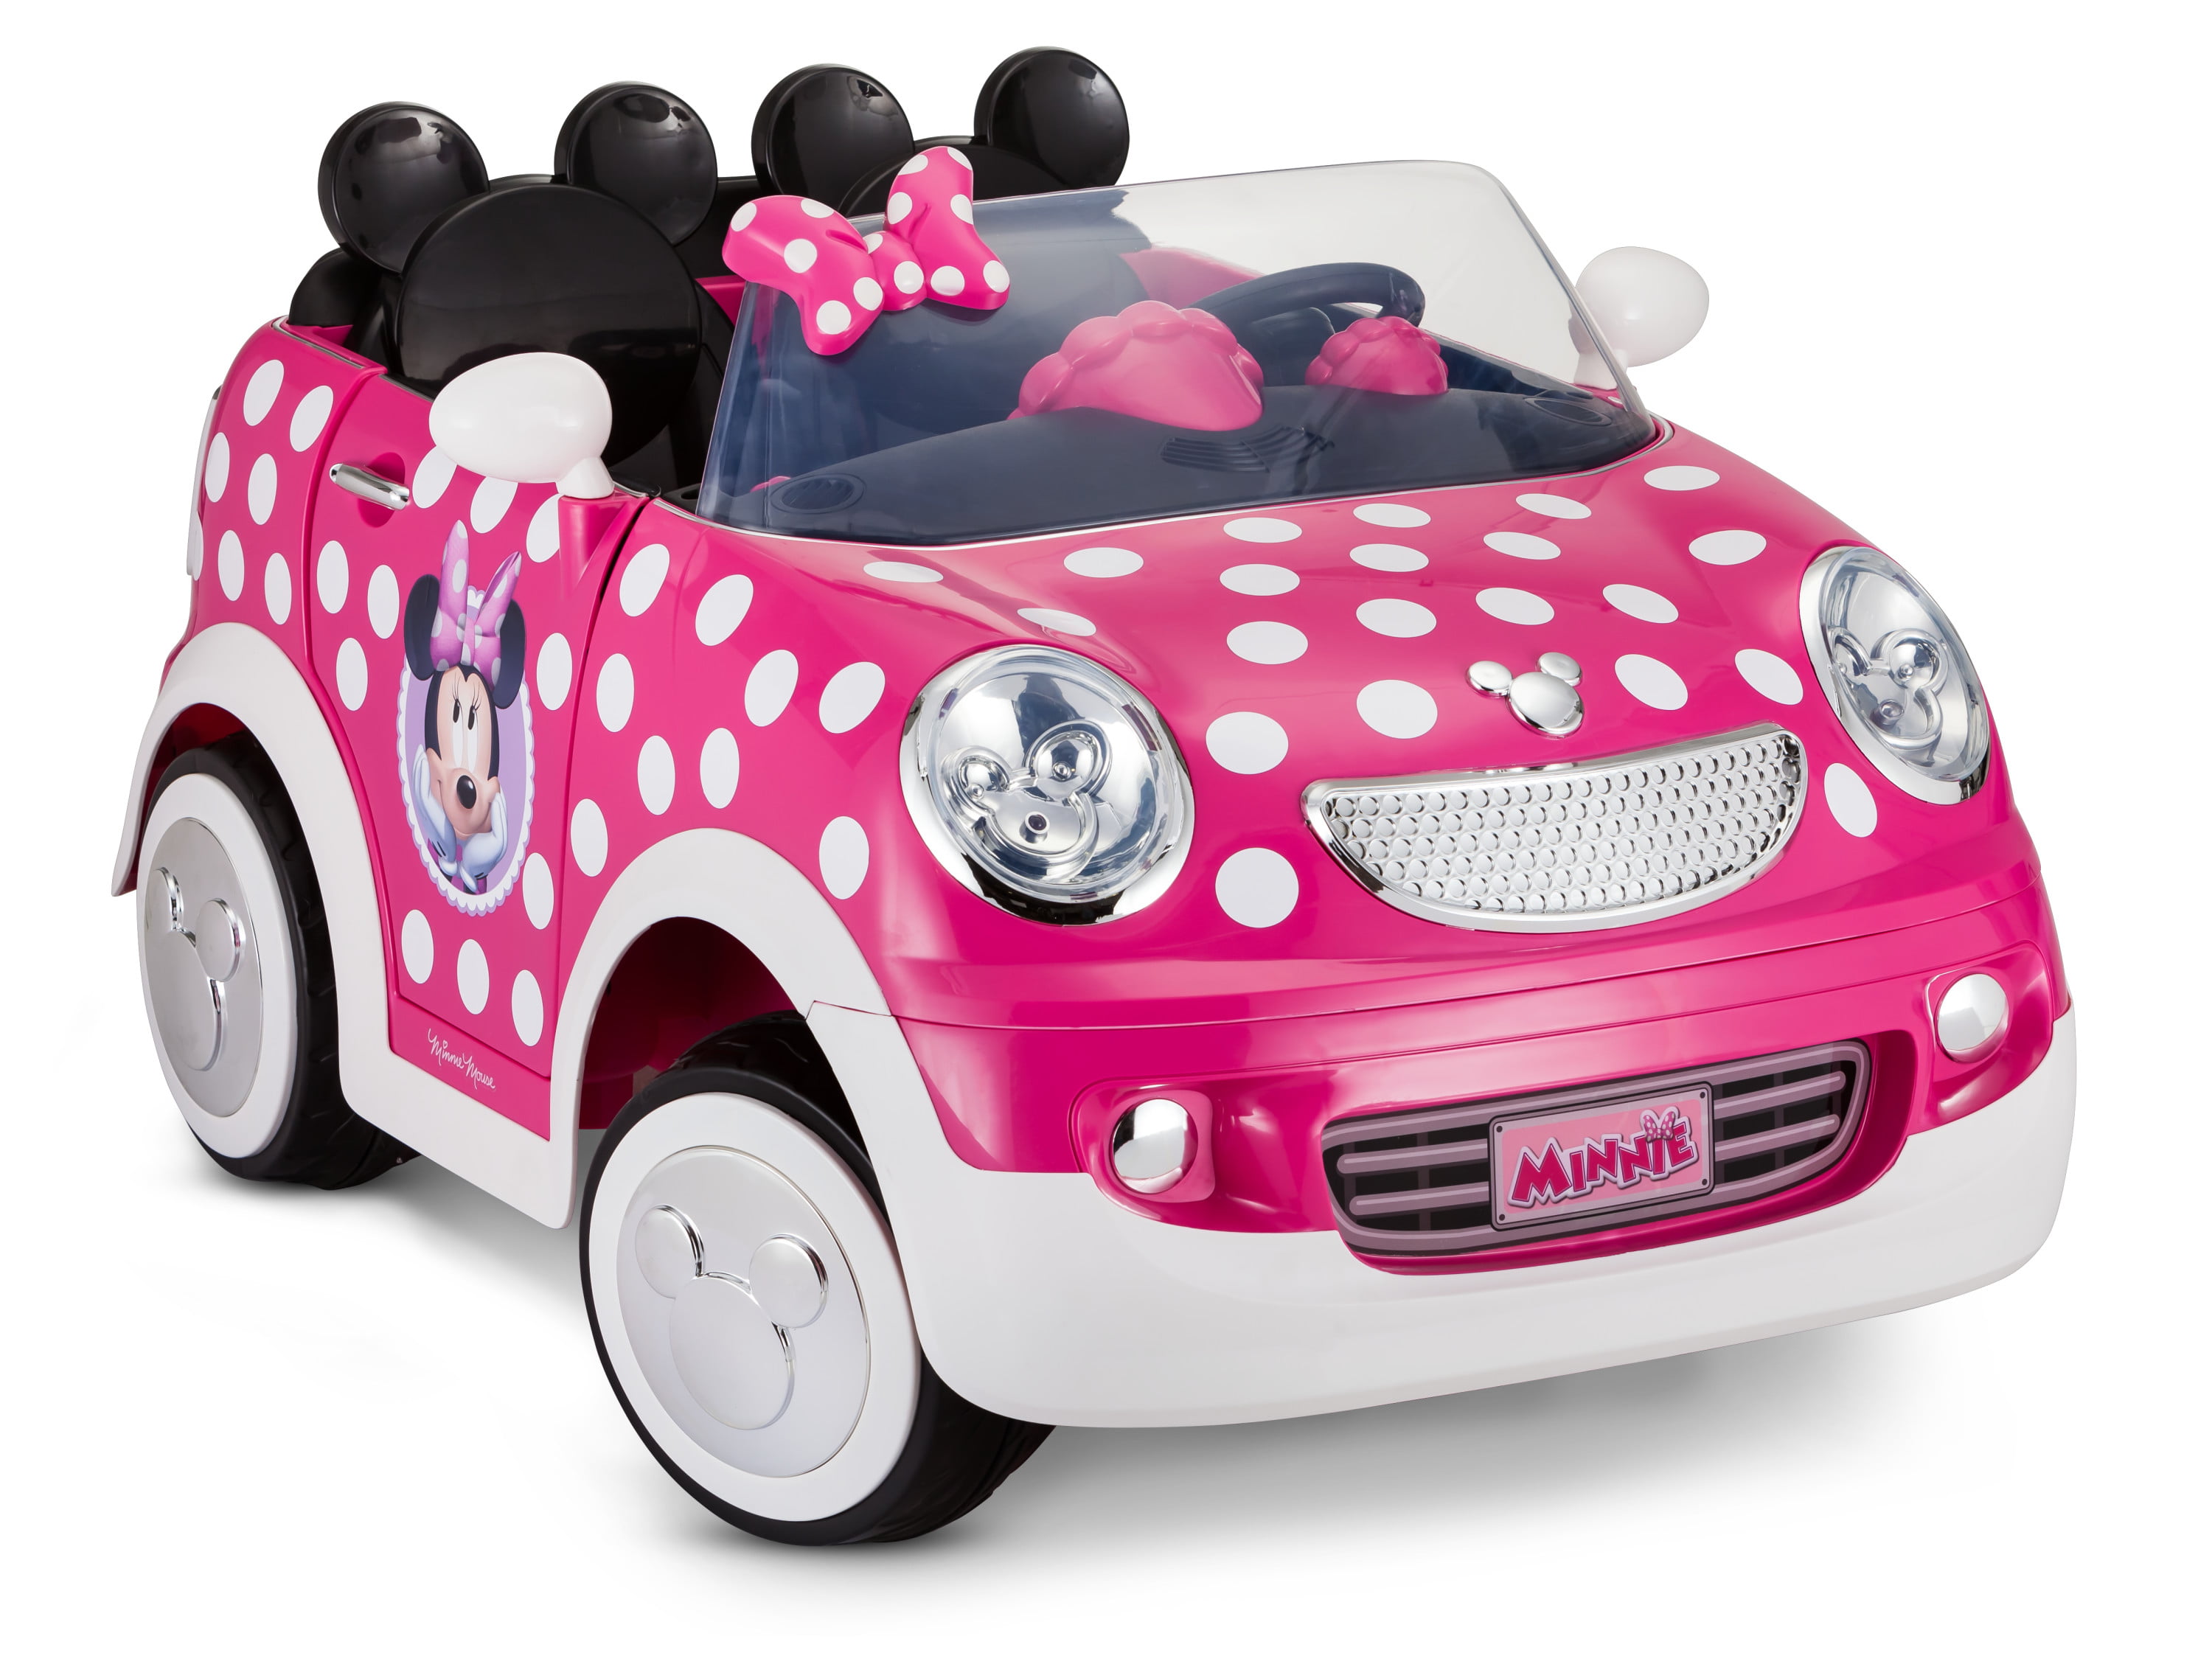 12 volt minnie mouse mercedes battery powered ride on